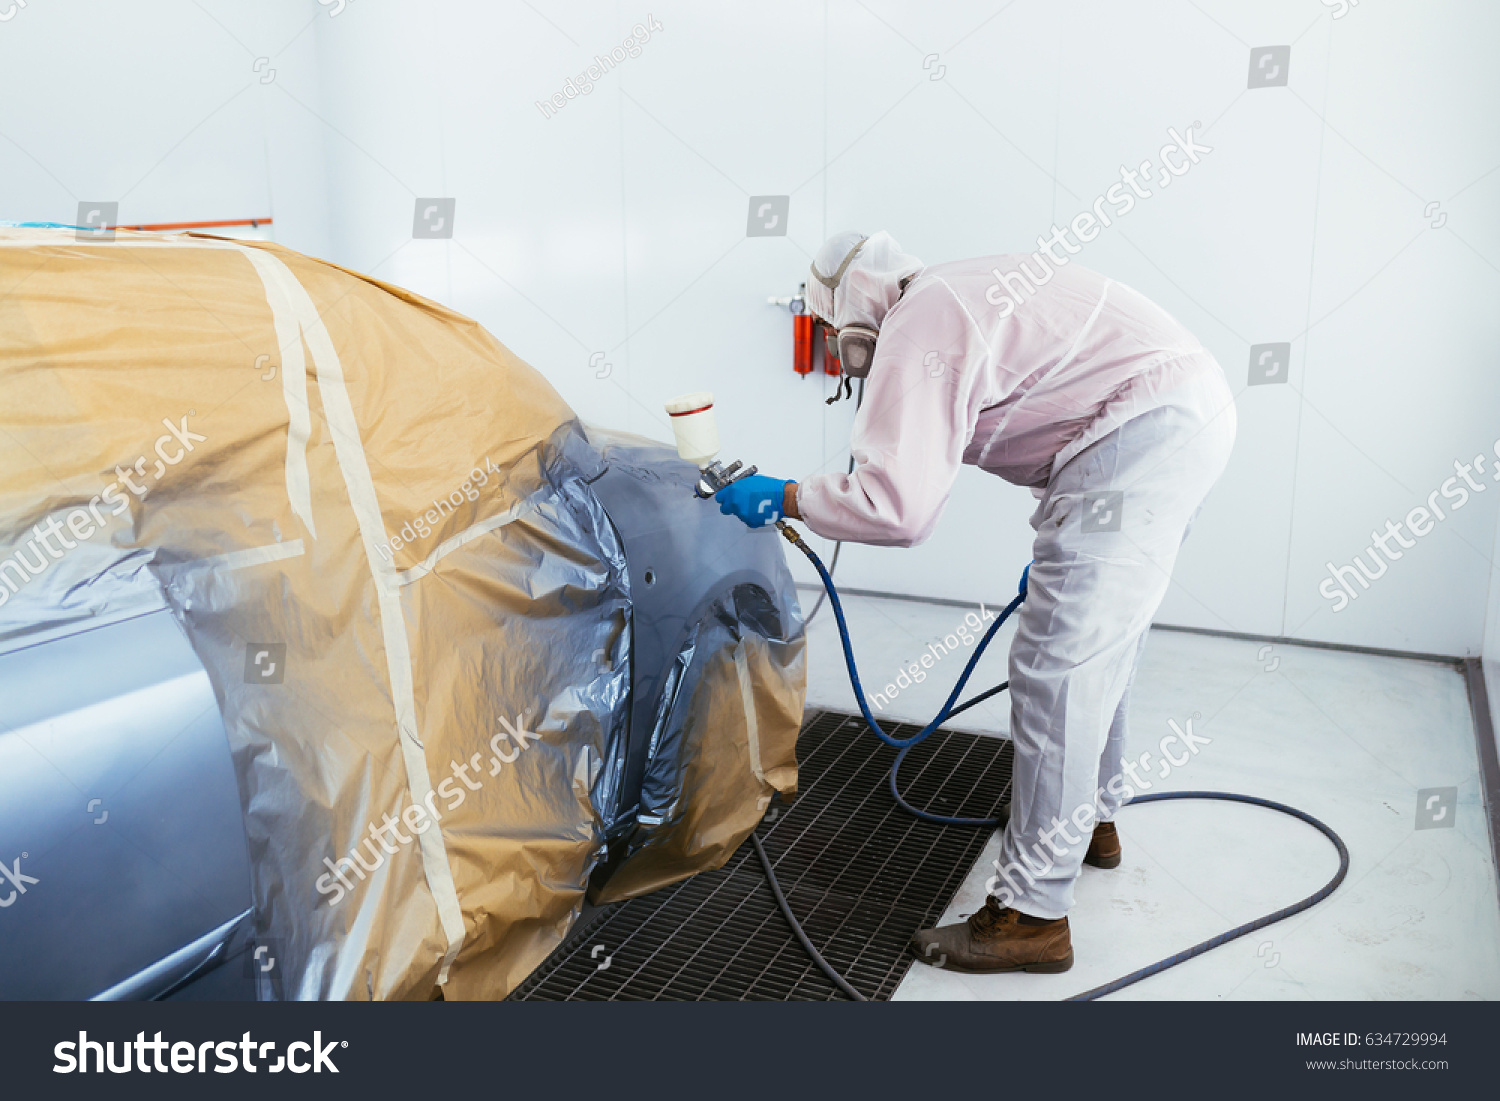 Man with protective clothes and mask painting car using spray compressor. Selective focus.  #634729994